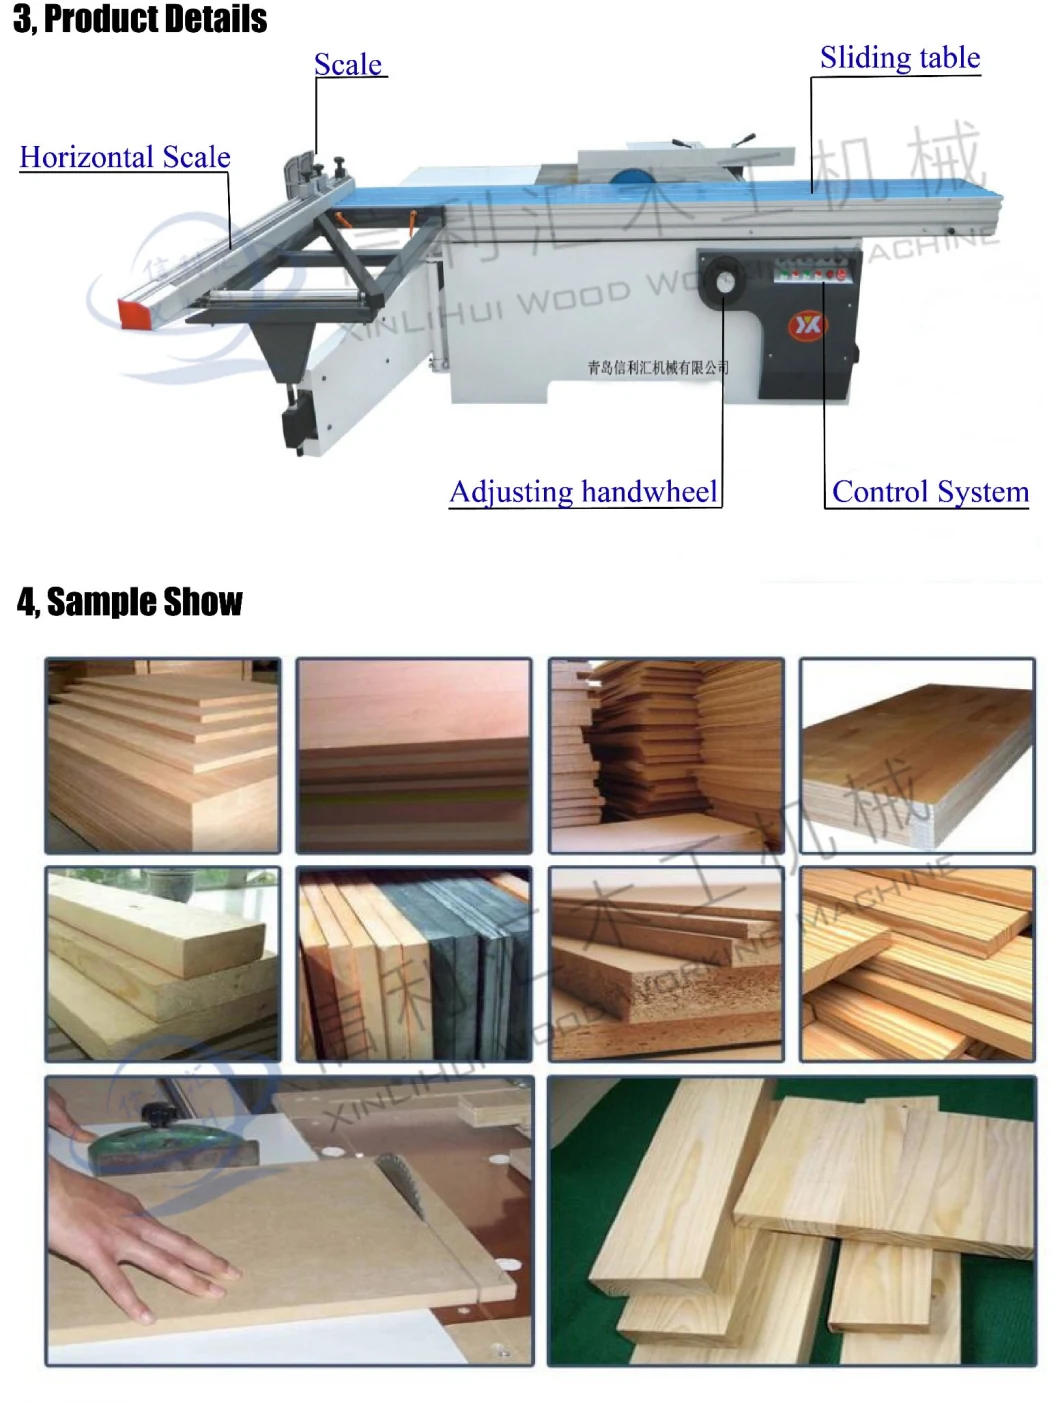 Saw Benches, Large Table Saws Table Saw, Table Top Bench Saw Precision Cross Sliding Table, Table Saw Woodworking Jig, Table Scroll Saw Large Table Saws Table